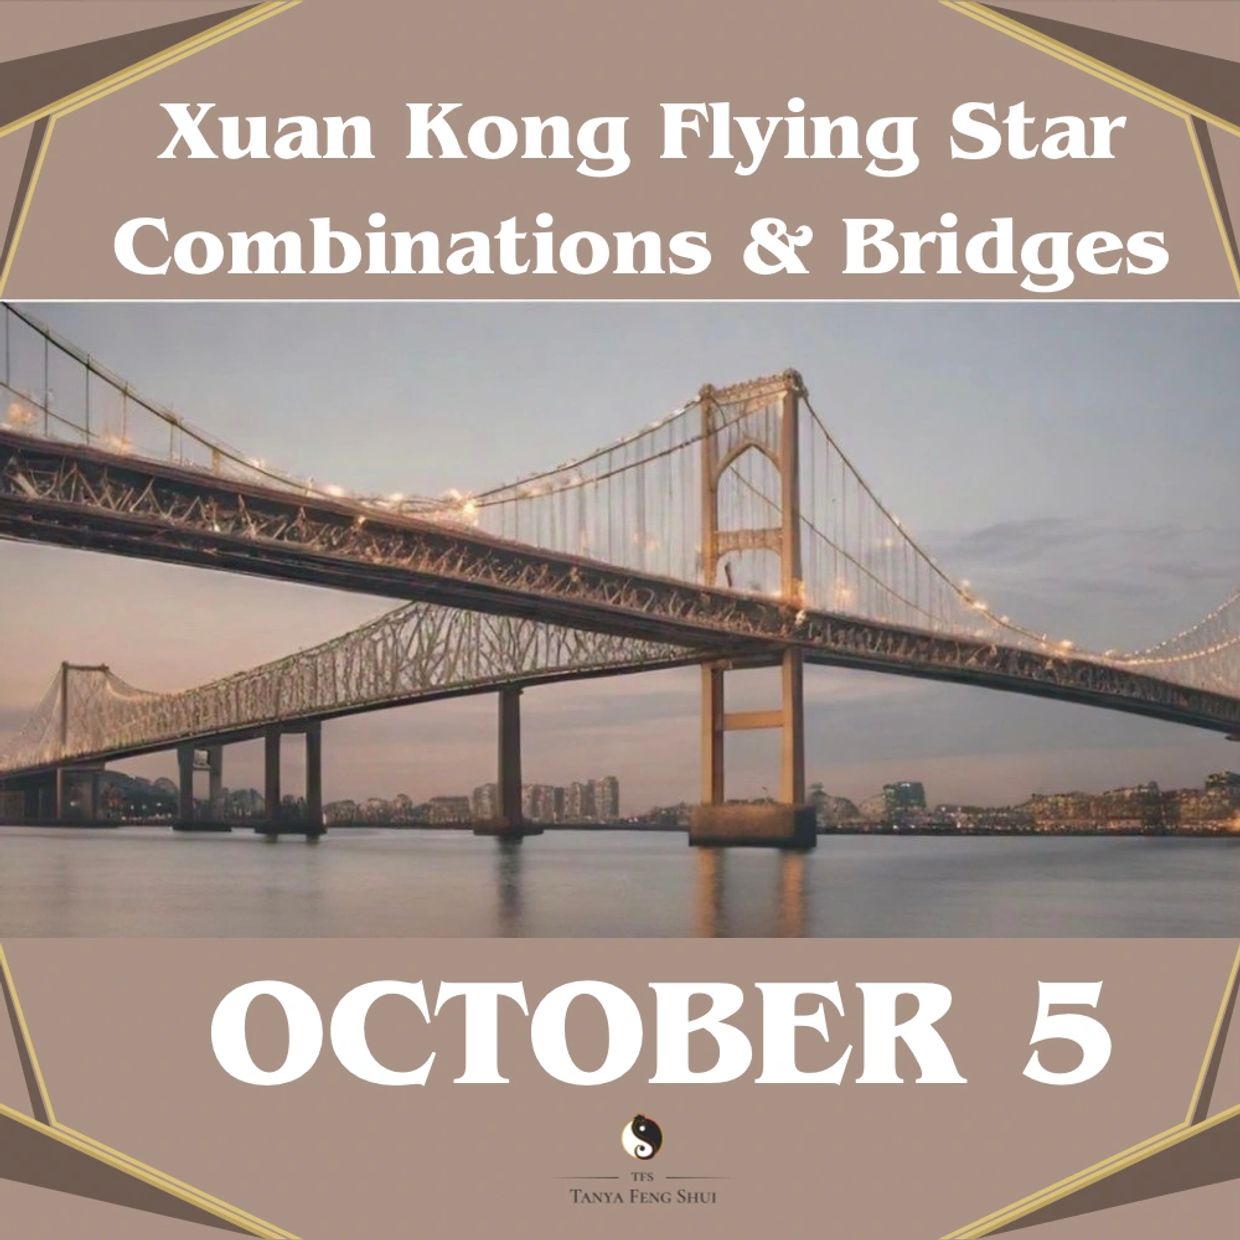 Xuan Kong Flying Star Combinations and Bridges Unveiled